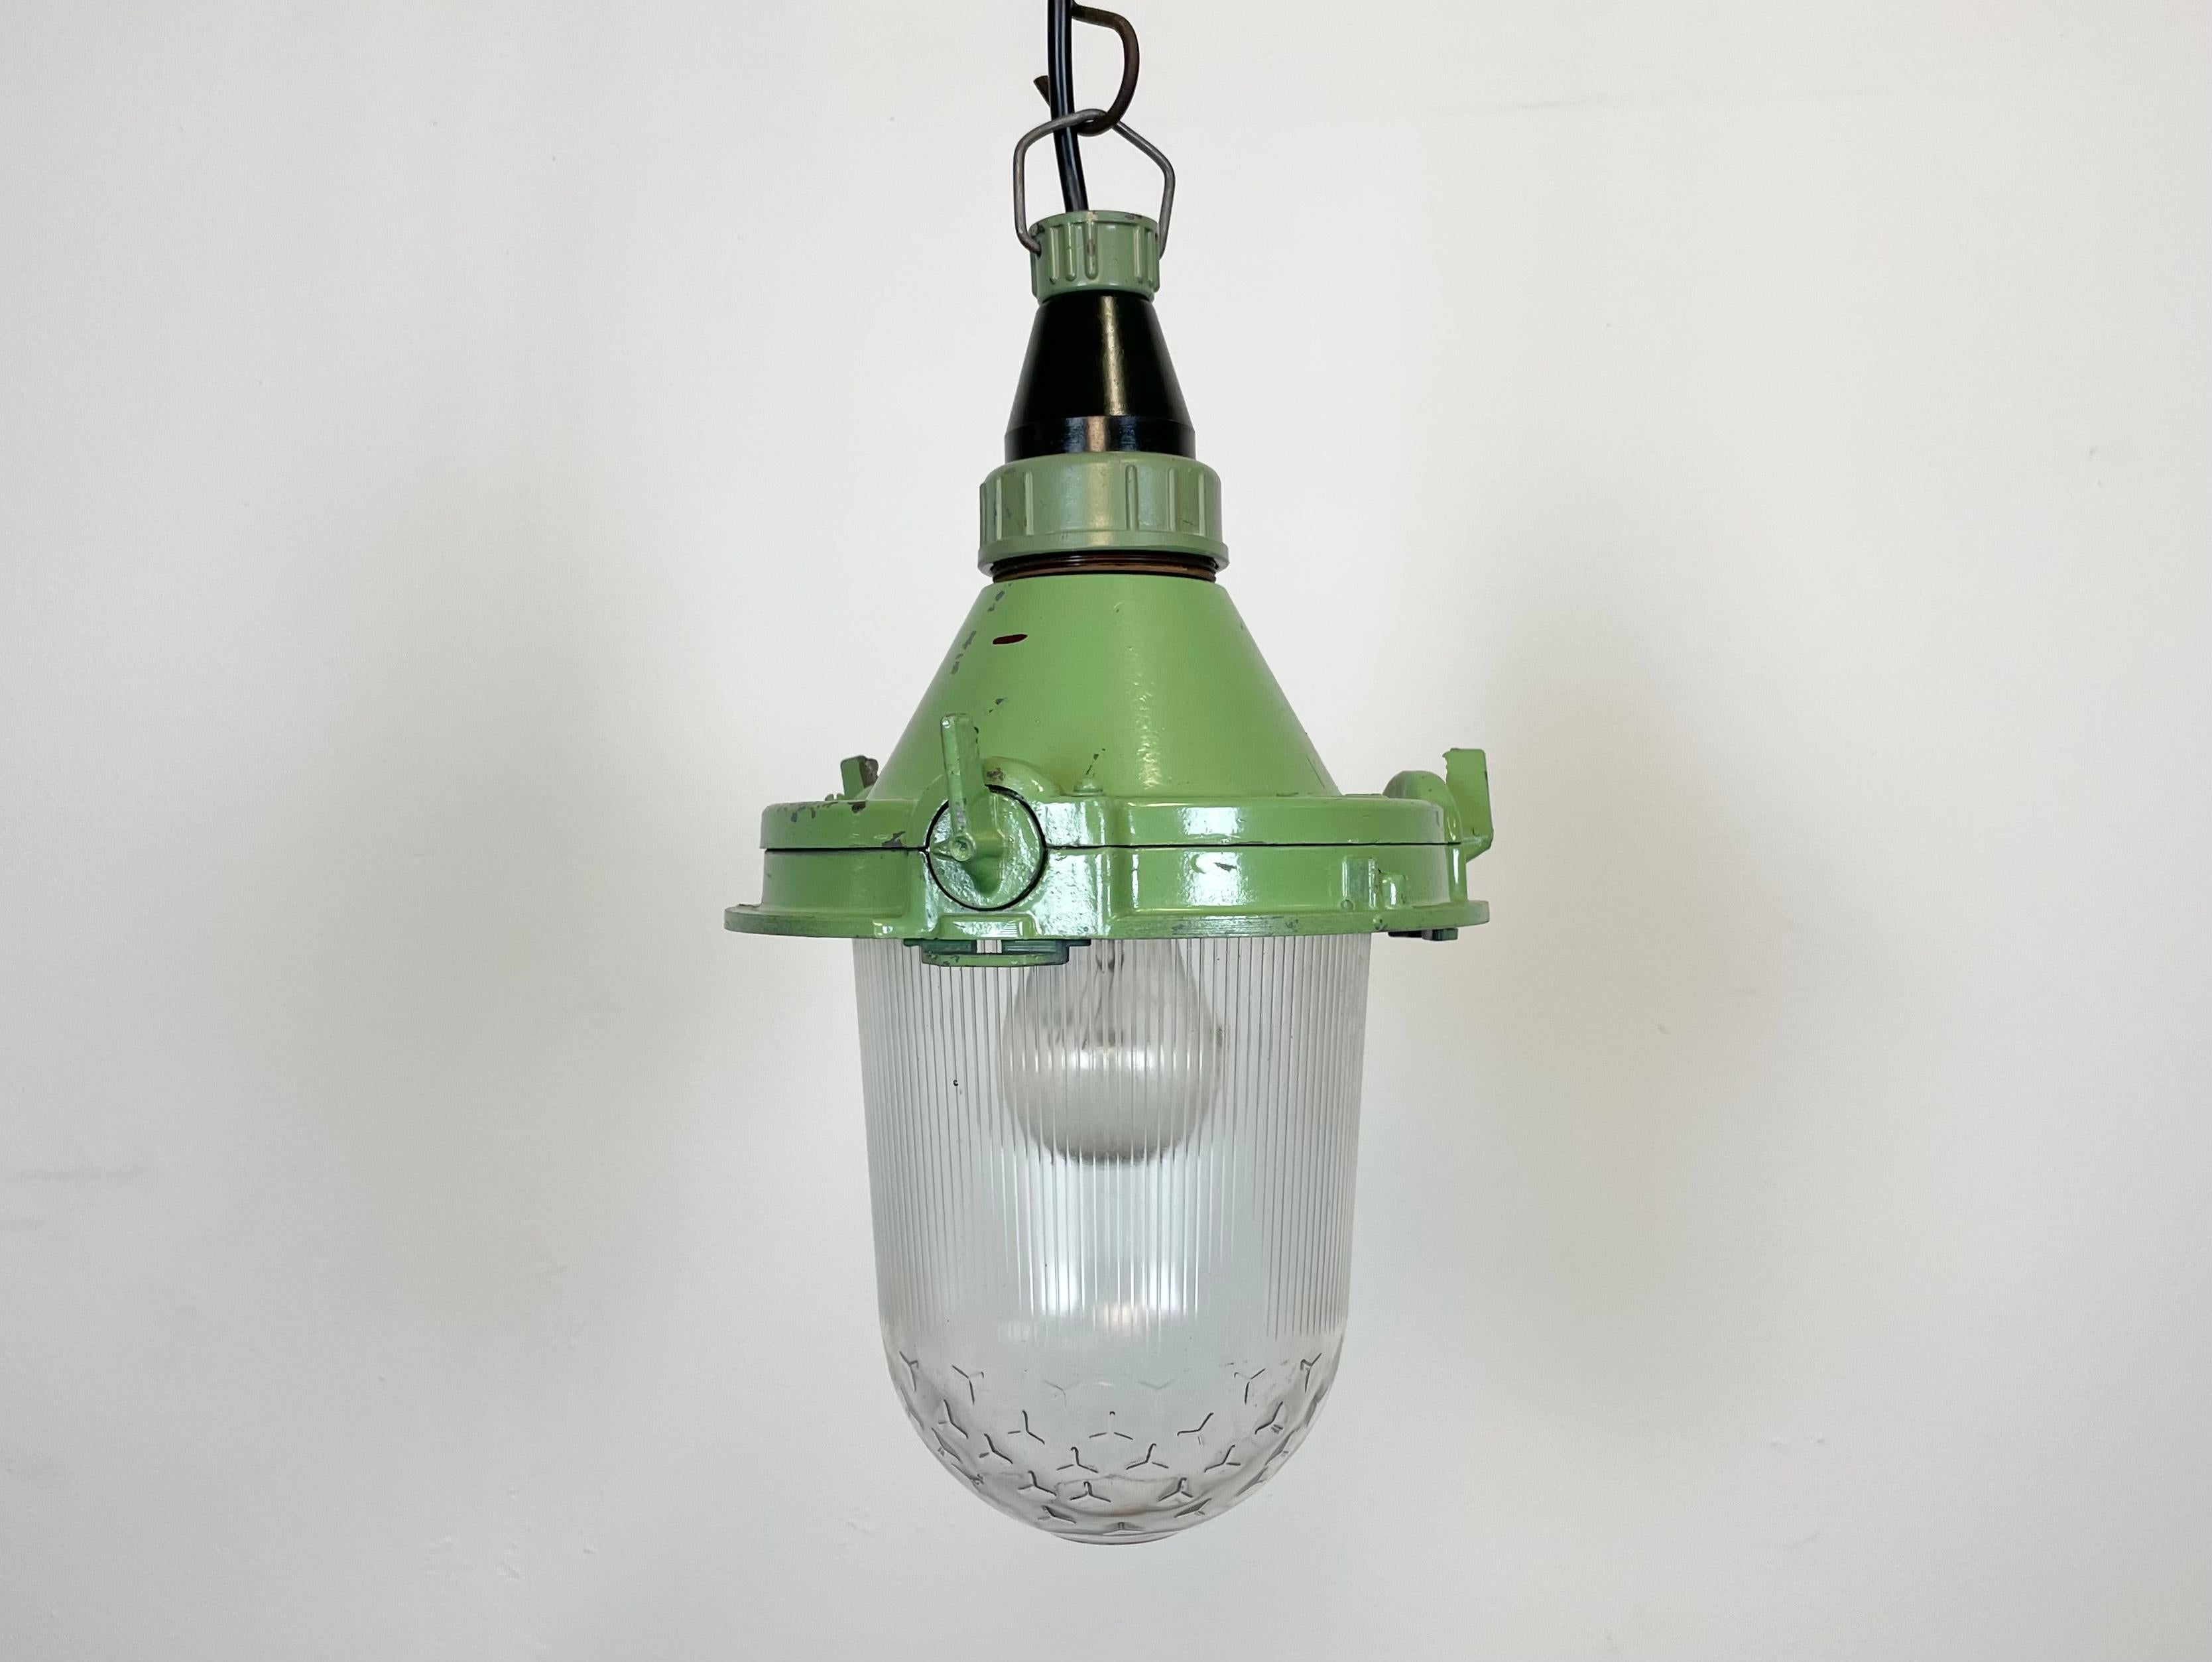 Green industrial light with massive protective glass bulb. Made in former Soviet Union during the 1960s. It features cast aluminium body and clear glass cover. The socket requires E27 lightbulbs. Newly wired. Weight: 2.3 kg.